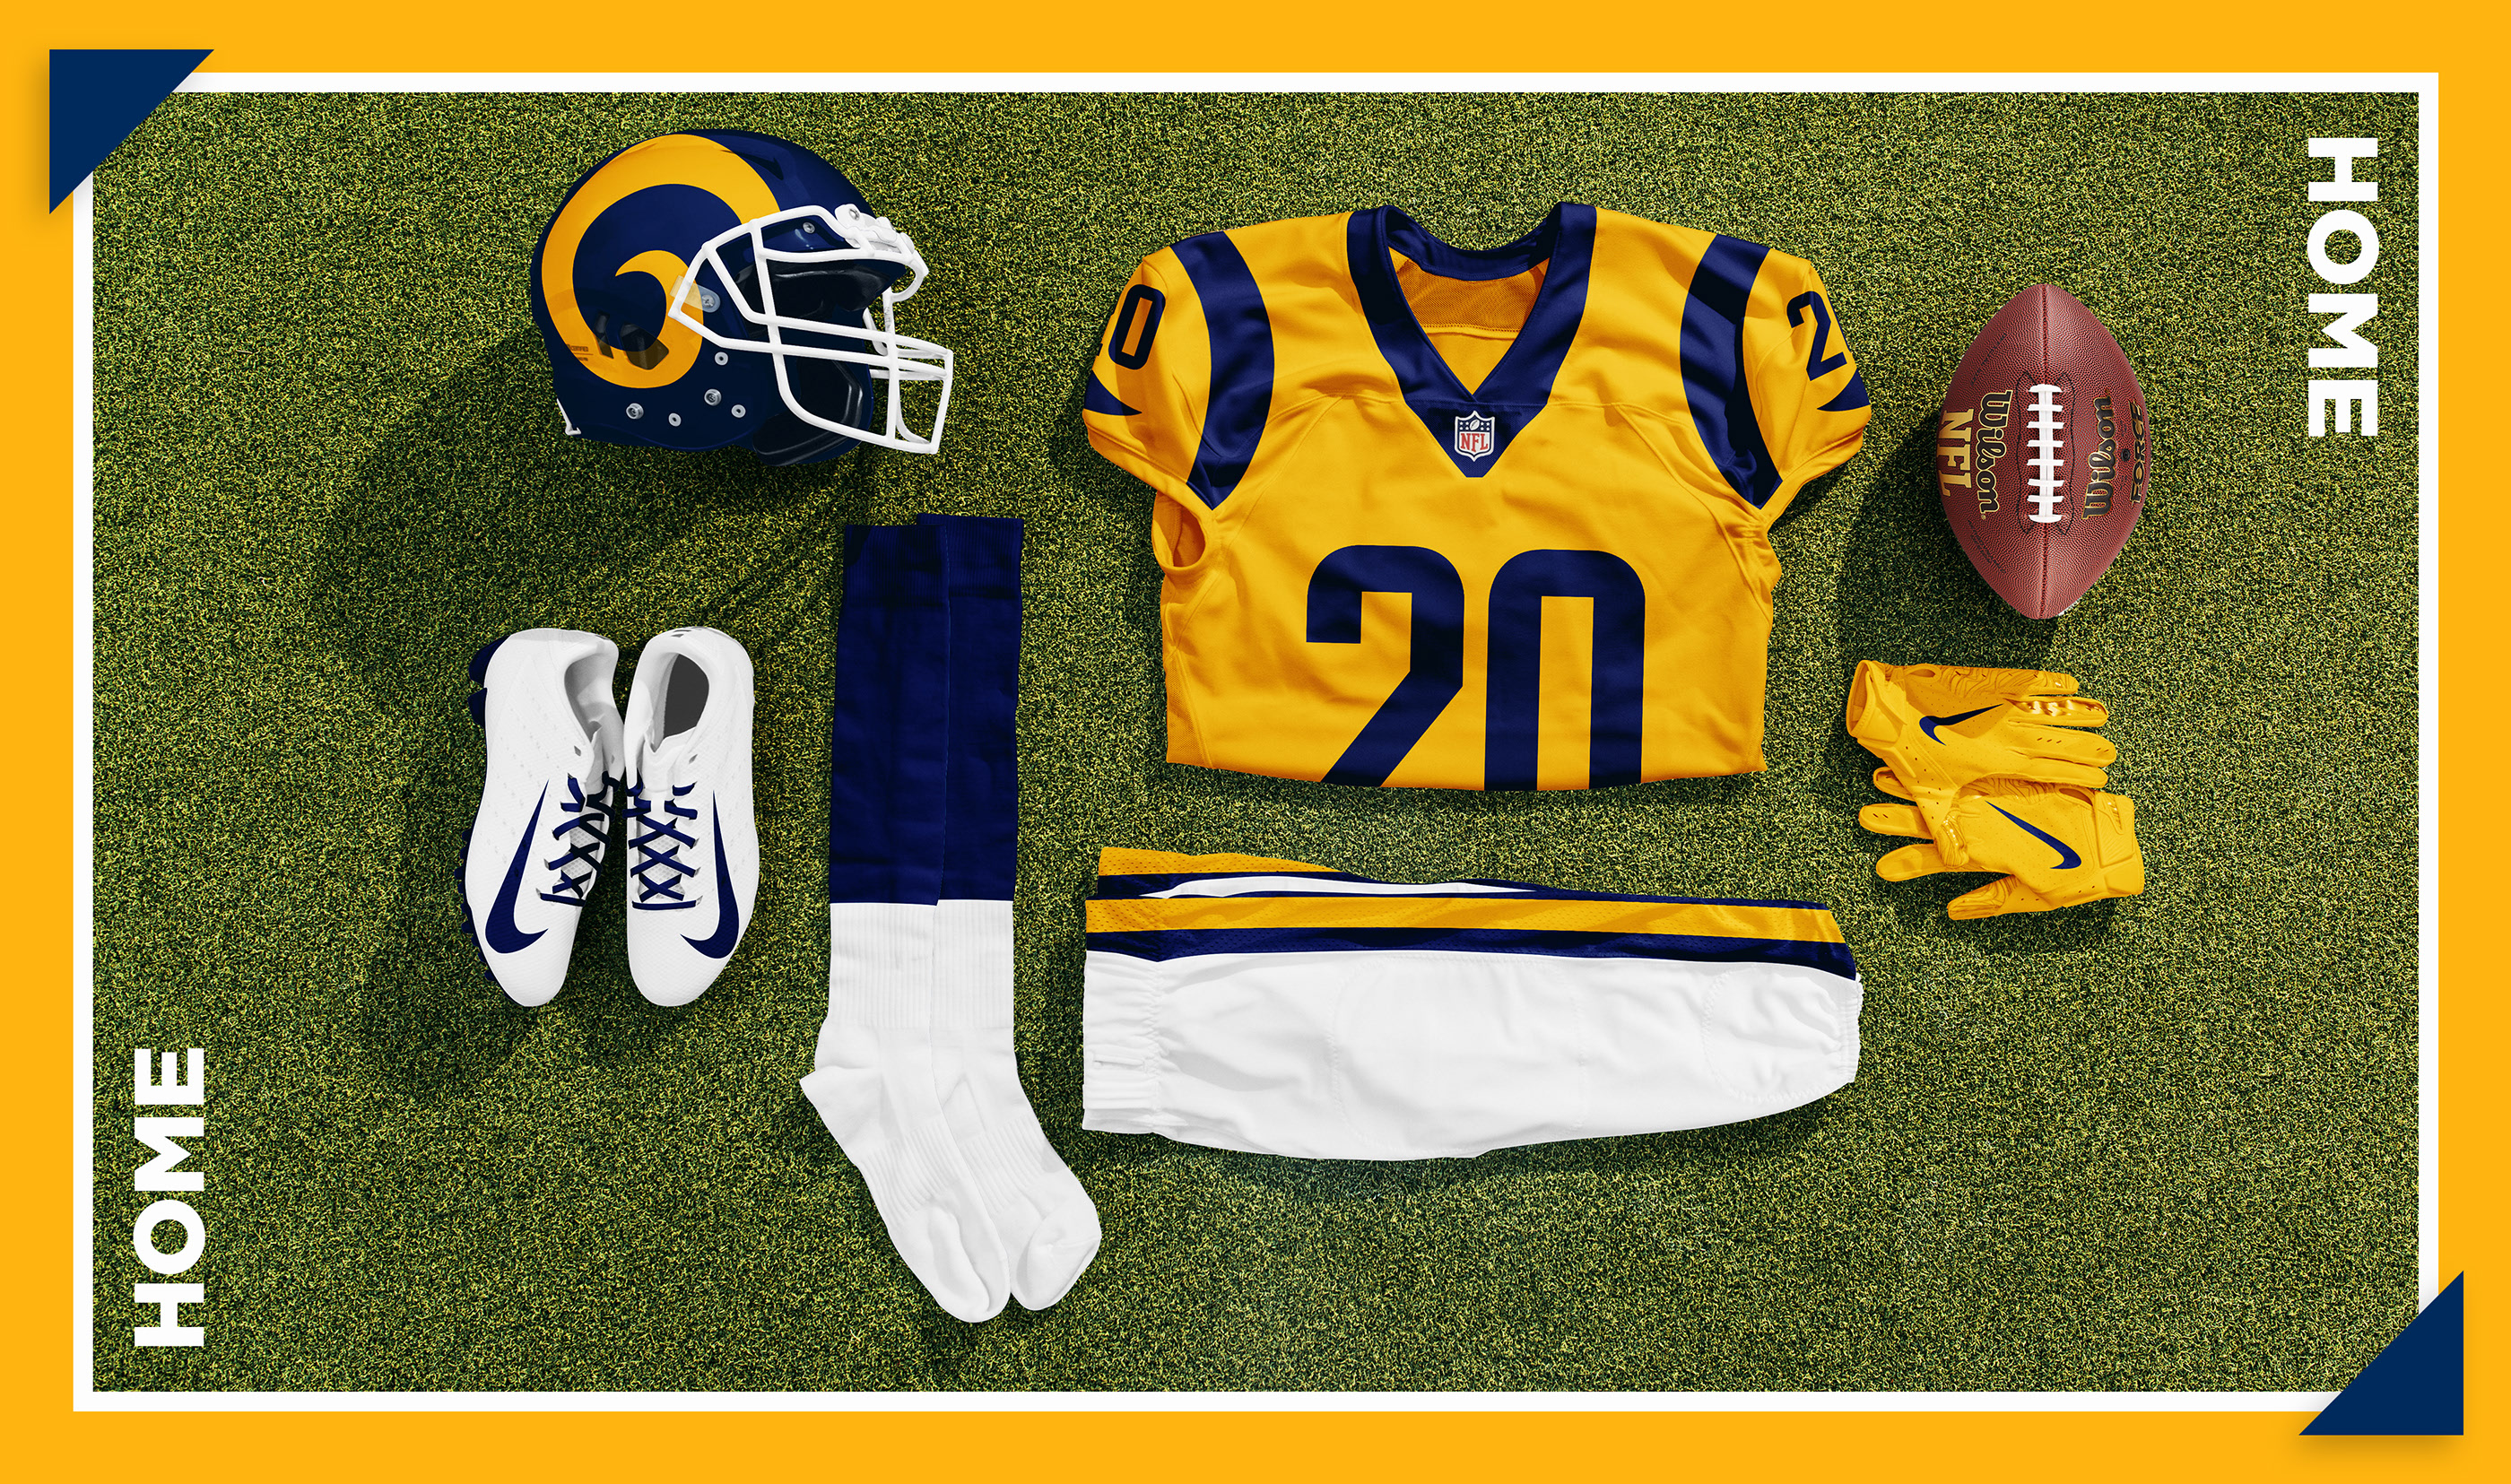 Rams will have a new uniform concept in 2021, so we asked you to design it  - The Athletic